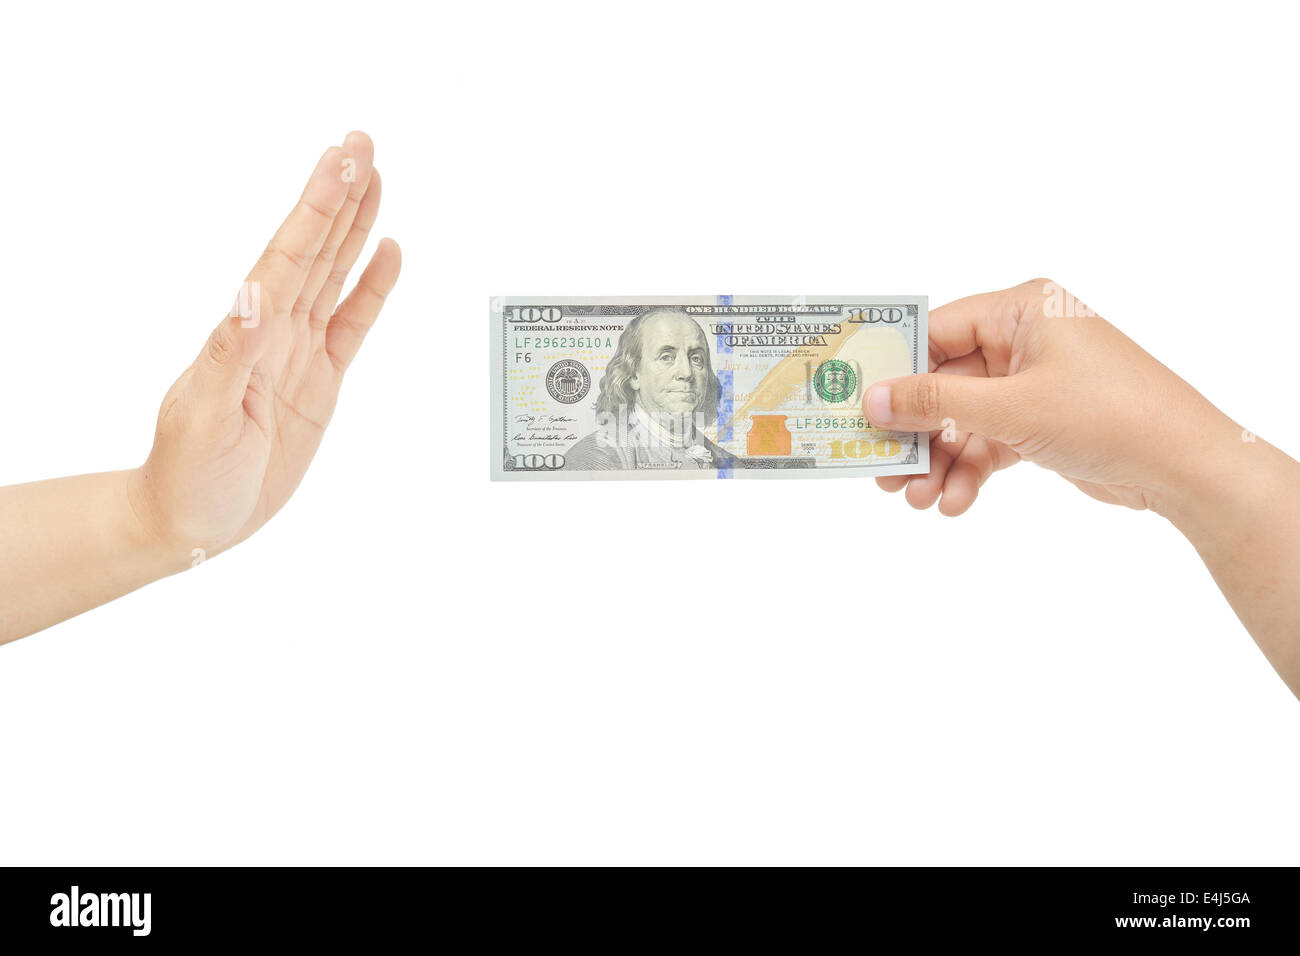 A hand's gesture for refusing bribe. Do not want money. Stock Photo